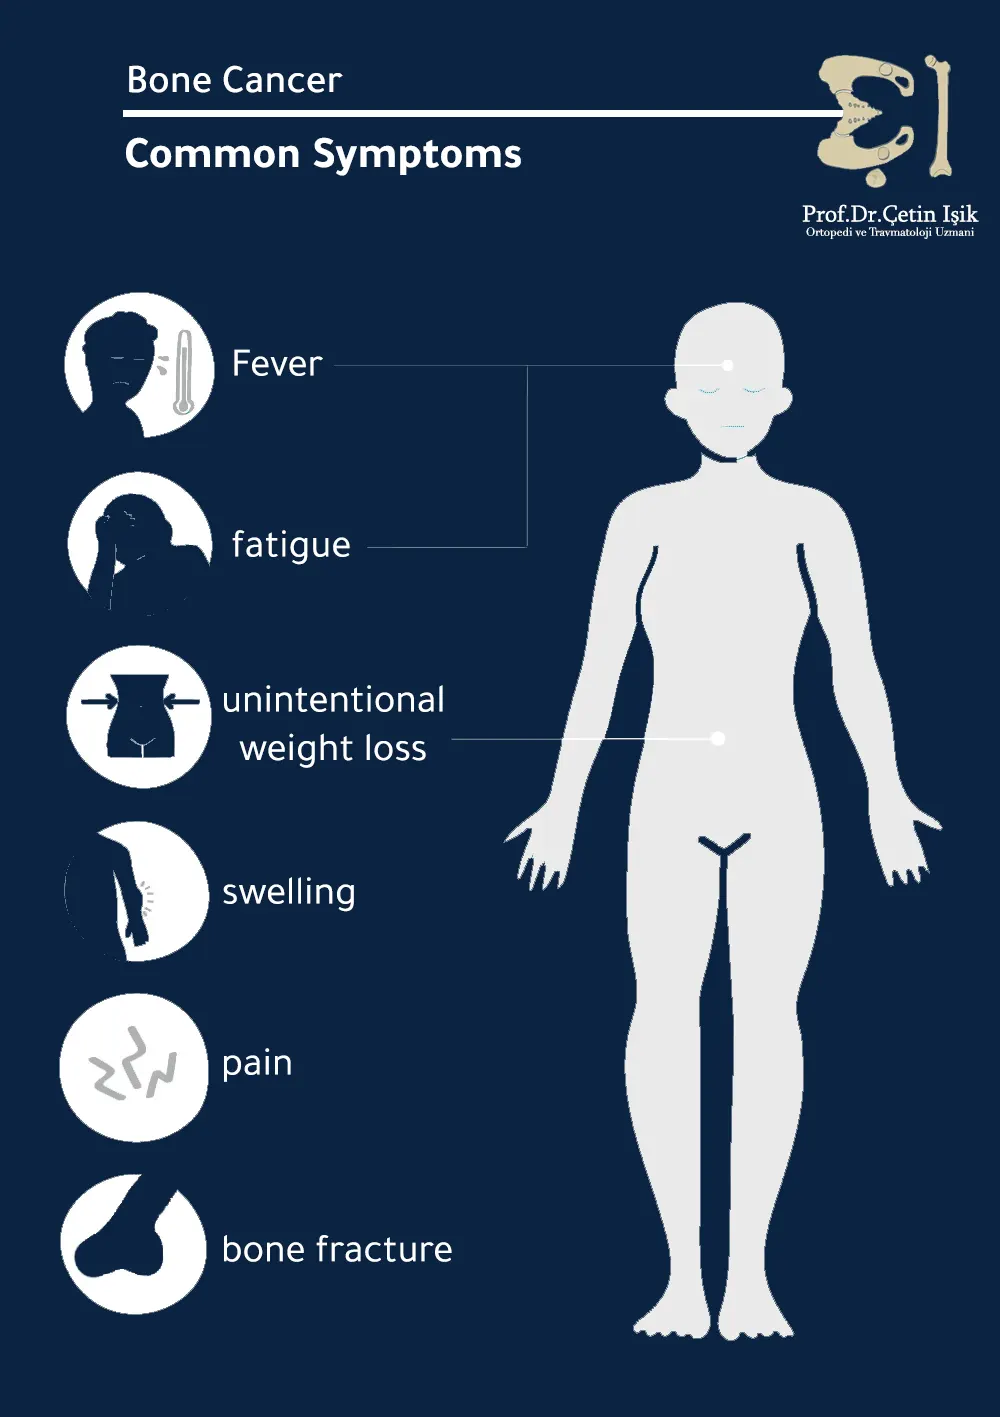 A picture showing the symptoms of bone cancer